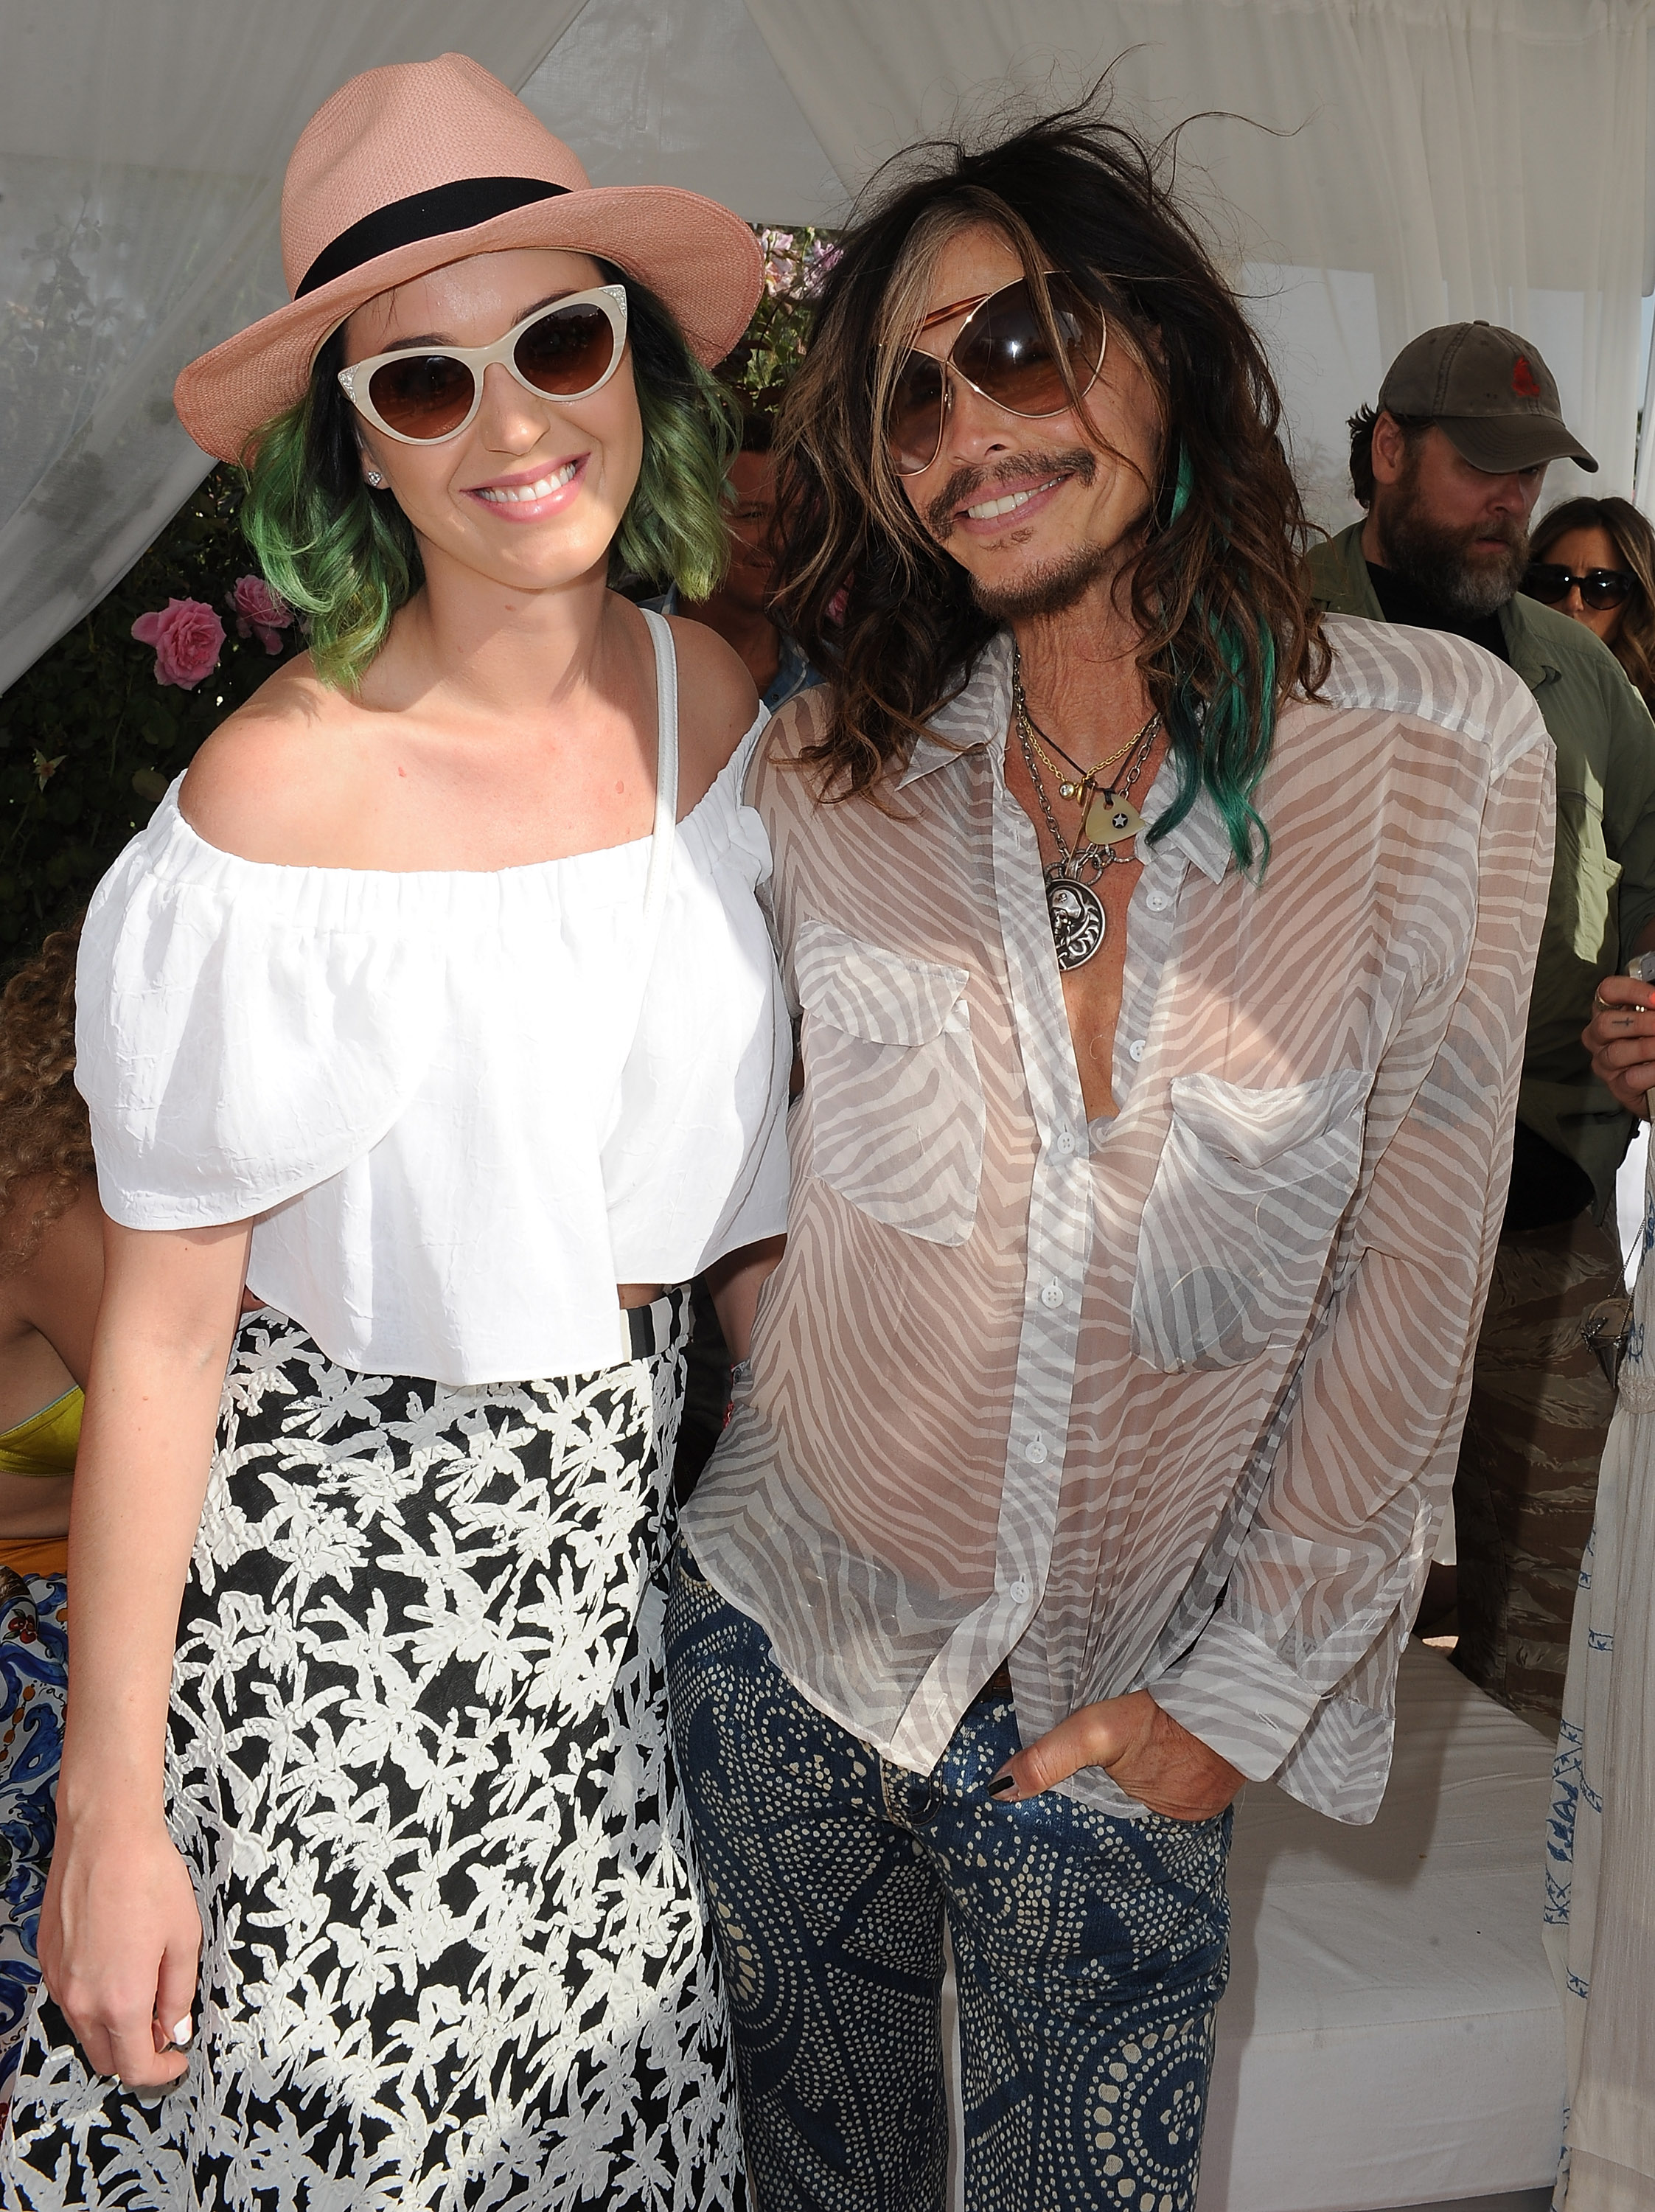 Katy Perry & Steven Tyler - Moet & Chandon Ice Imperial Debuts At The Lacoste Beautiful Desert Pool Party